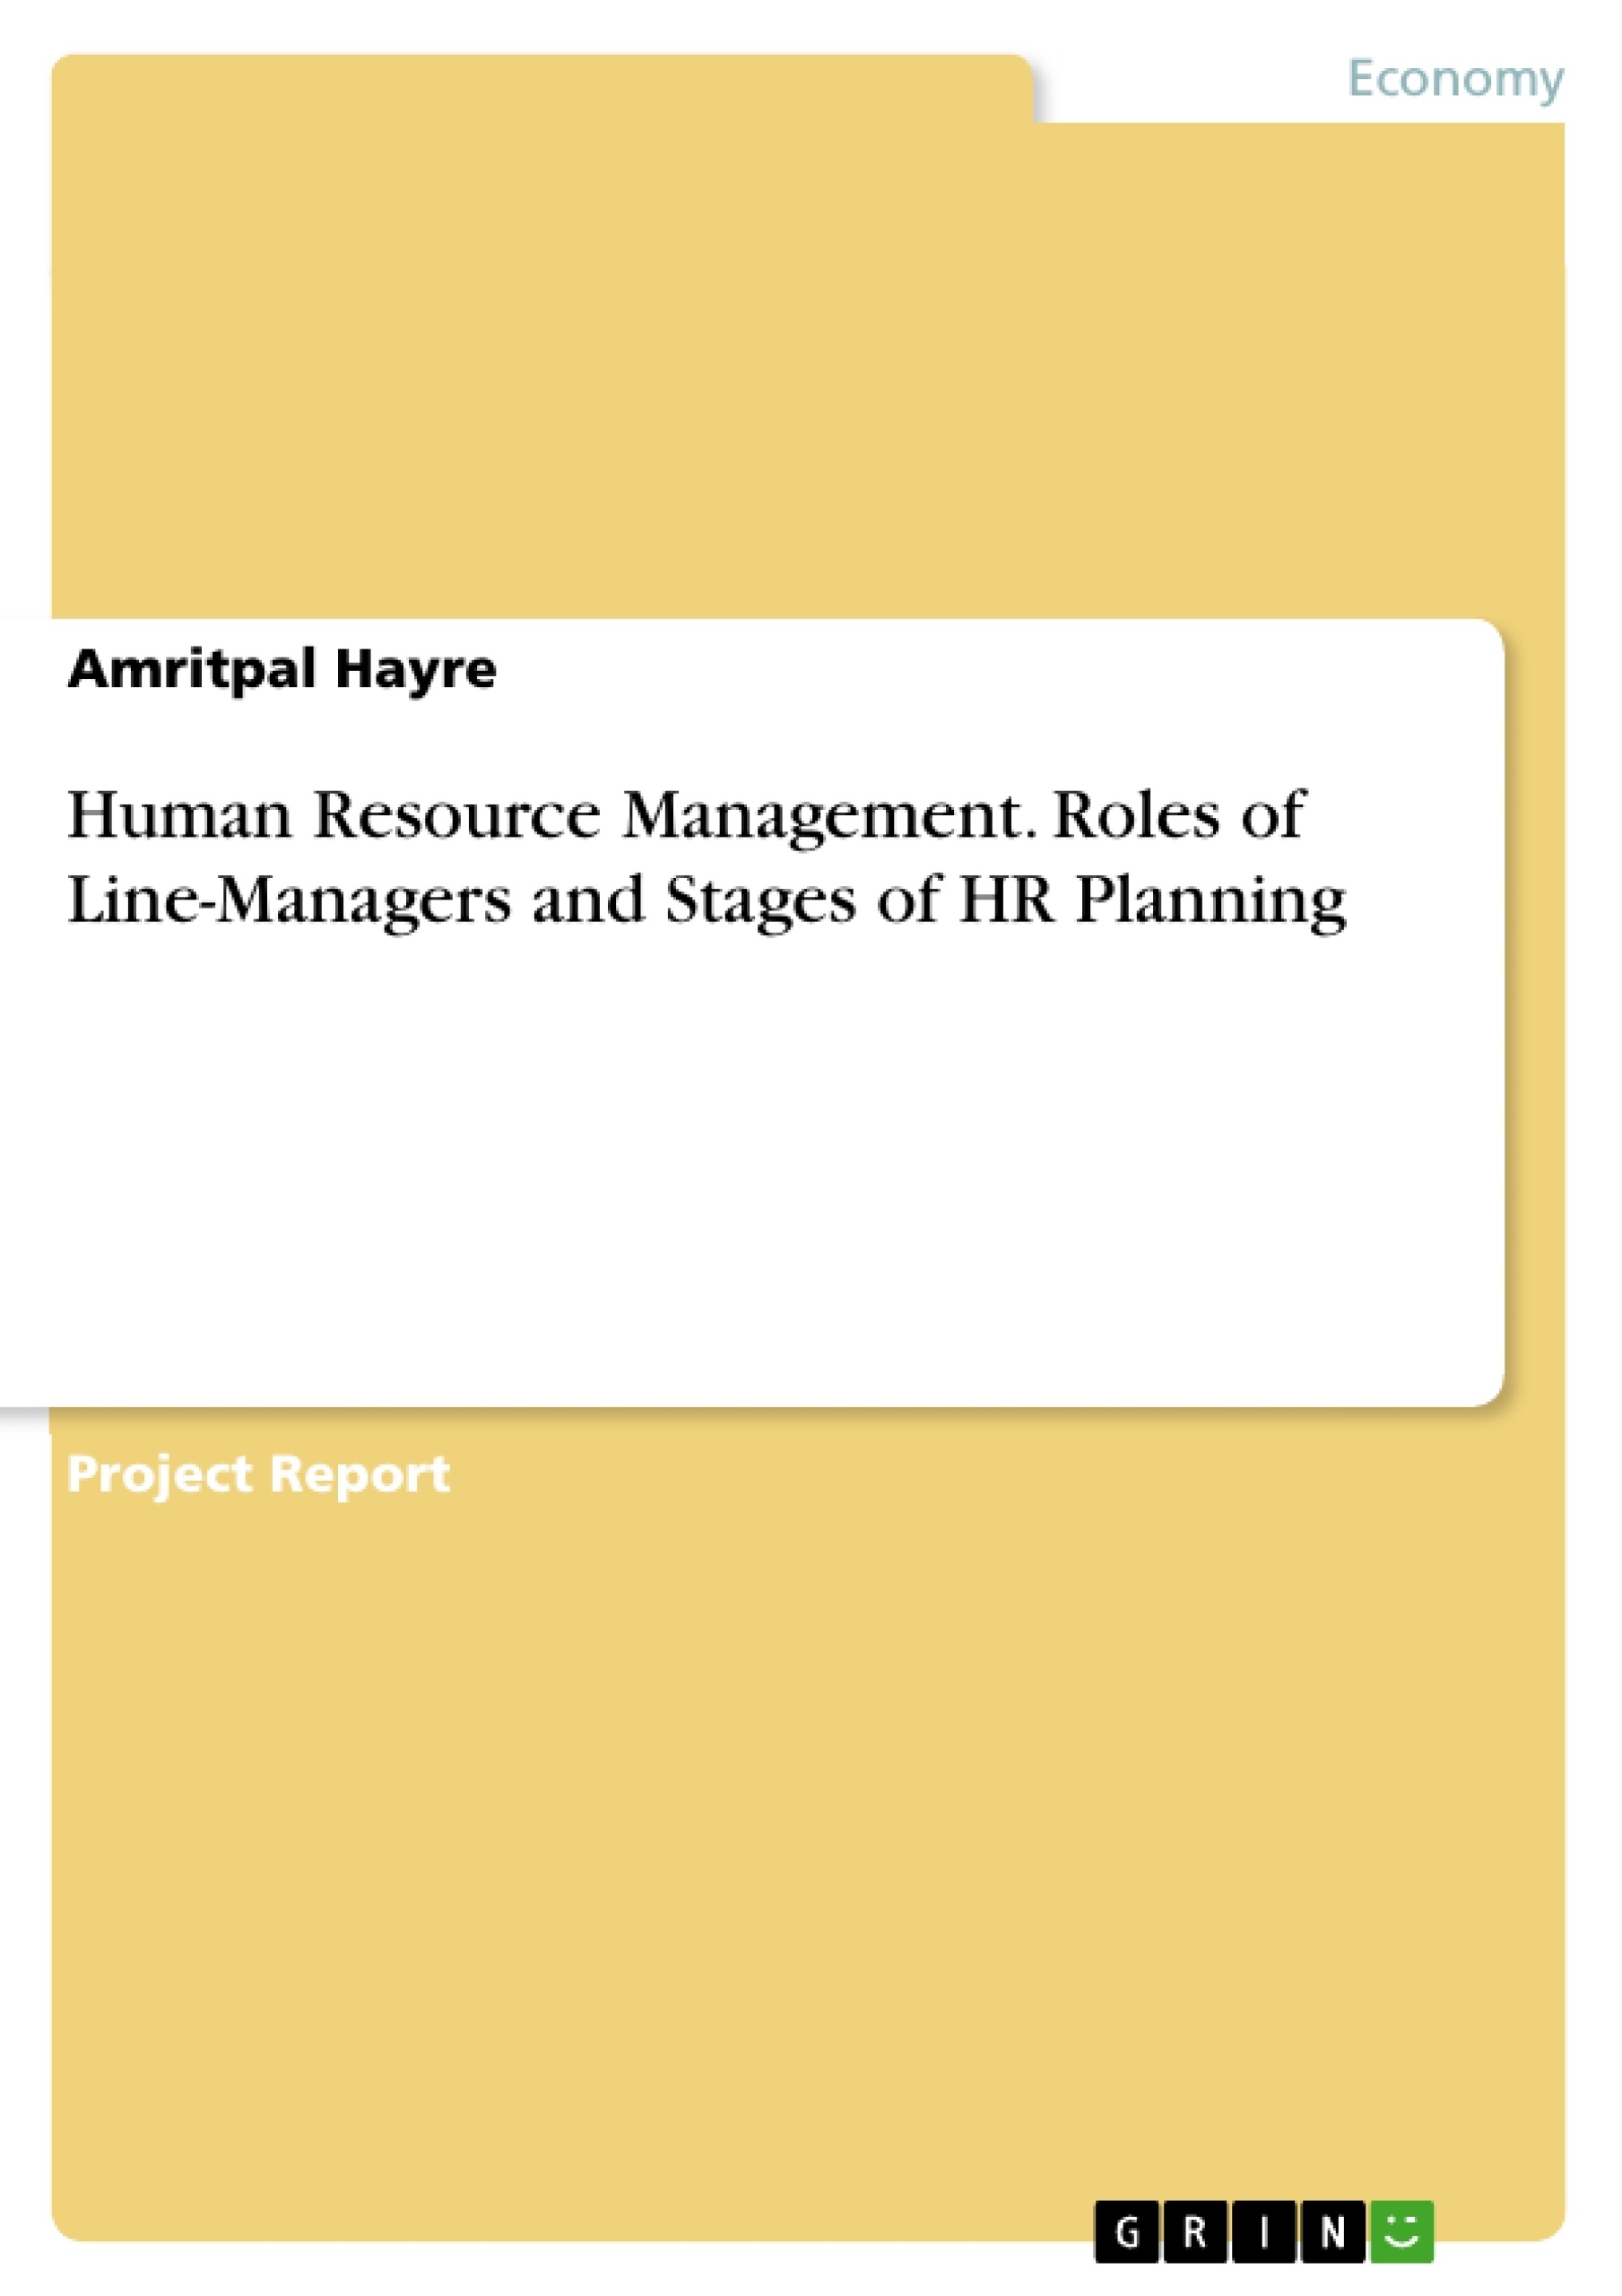 Title: Human Resource Management. Roles of Line-Managers and Stages of HR Planning